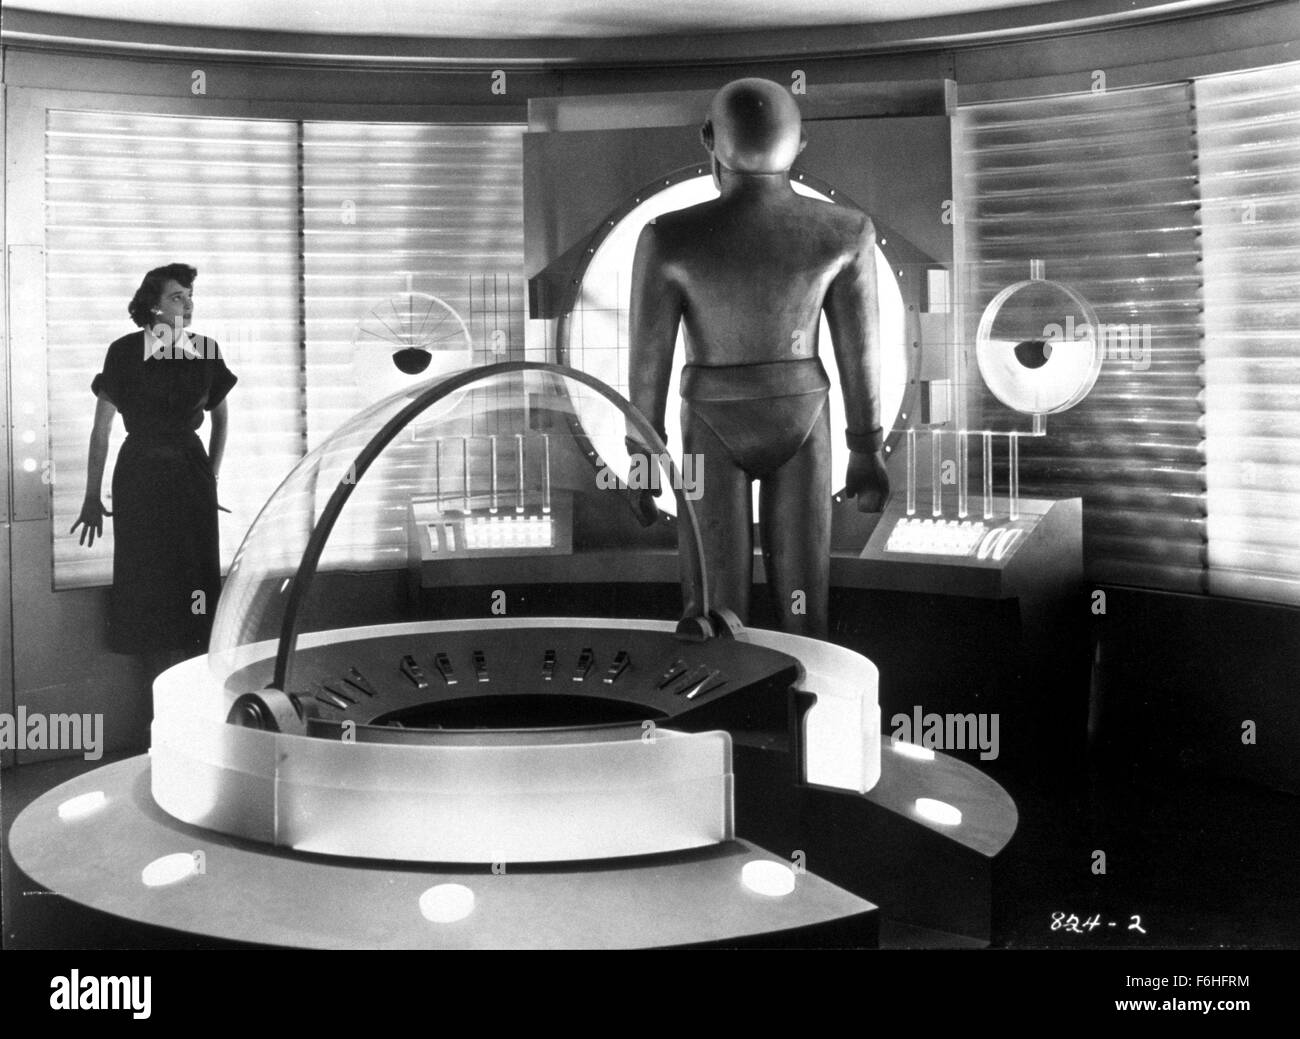 1951, Film Title: DAY THE EARTH STOOD STILL, Director: ROBERT WISE, Studio: FOX, Pictured: SCIENCE RUNS AMOK, 1951, ALIENS (GOOD), PATRICIA NEAL, ROBOTS-ANDROIDS-CYBORGS-CLONES, SCI-FI, VENETIAN BLINDS, LABORATORY. (Credit Image: SNAP) Stock Photo